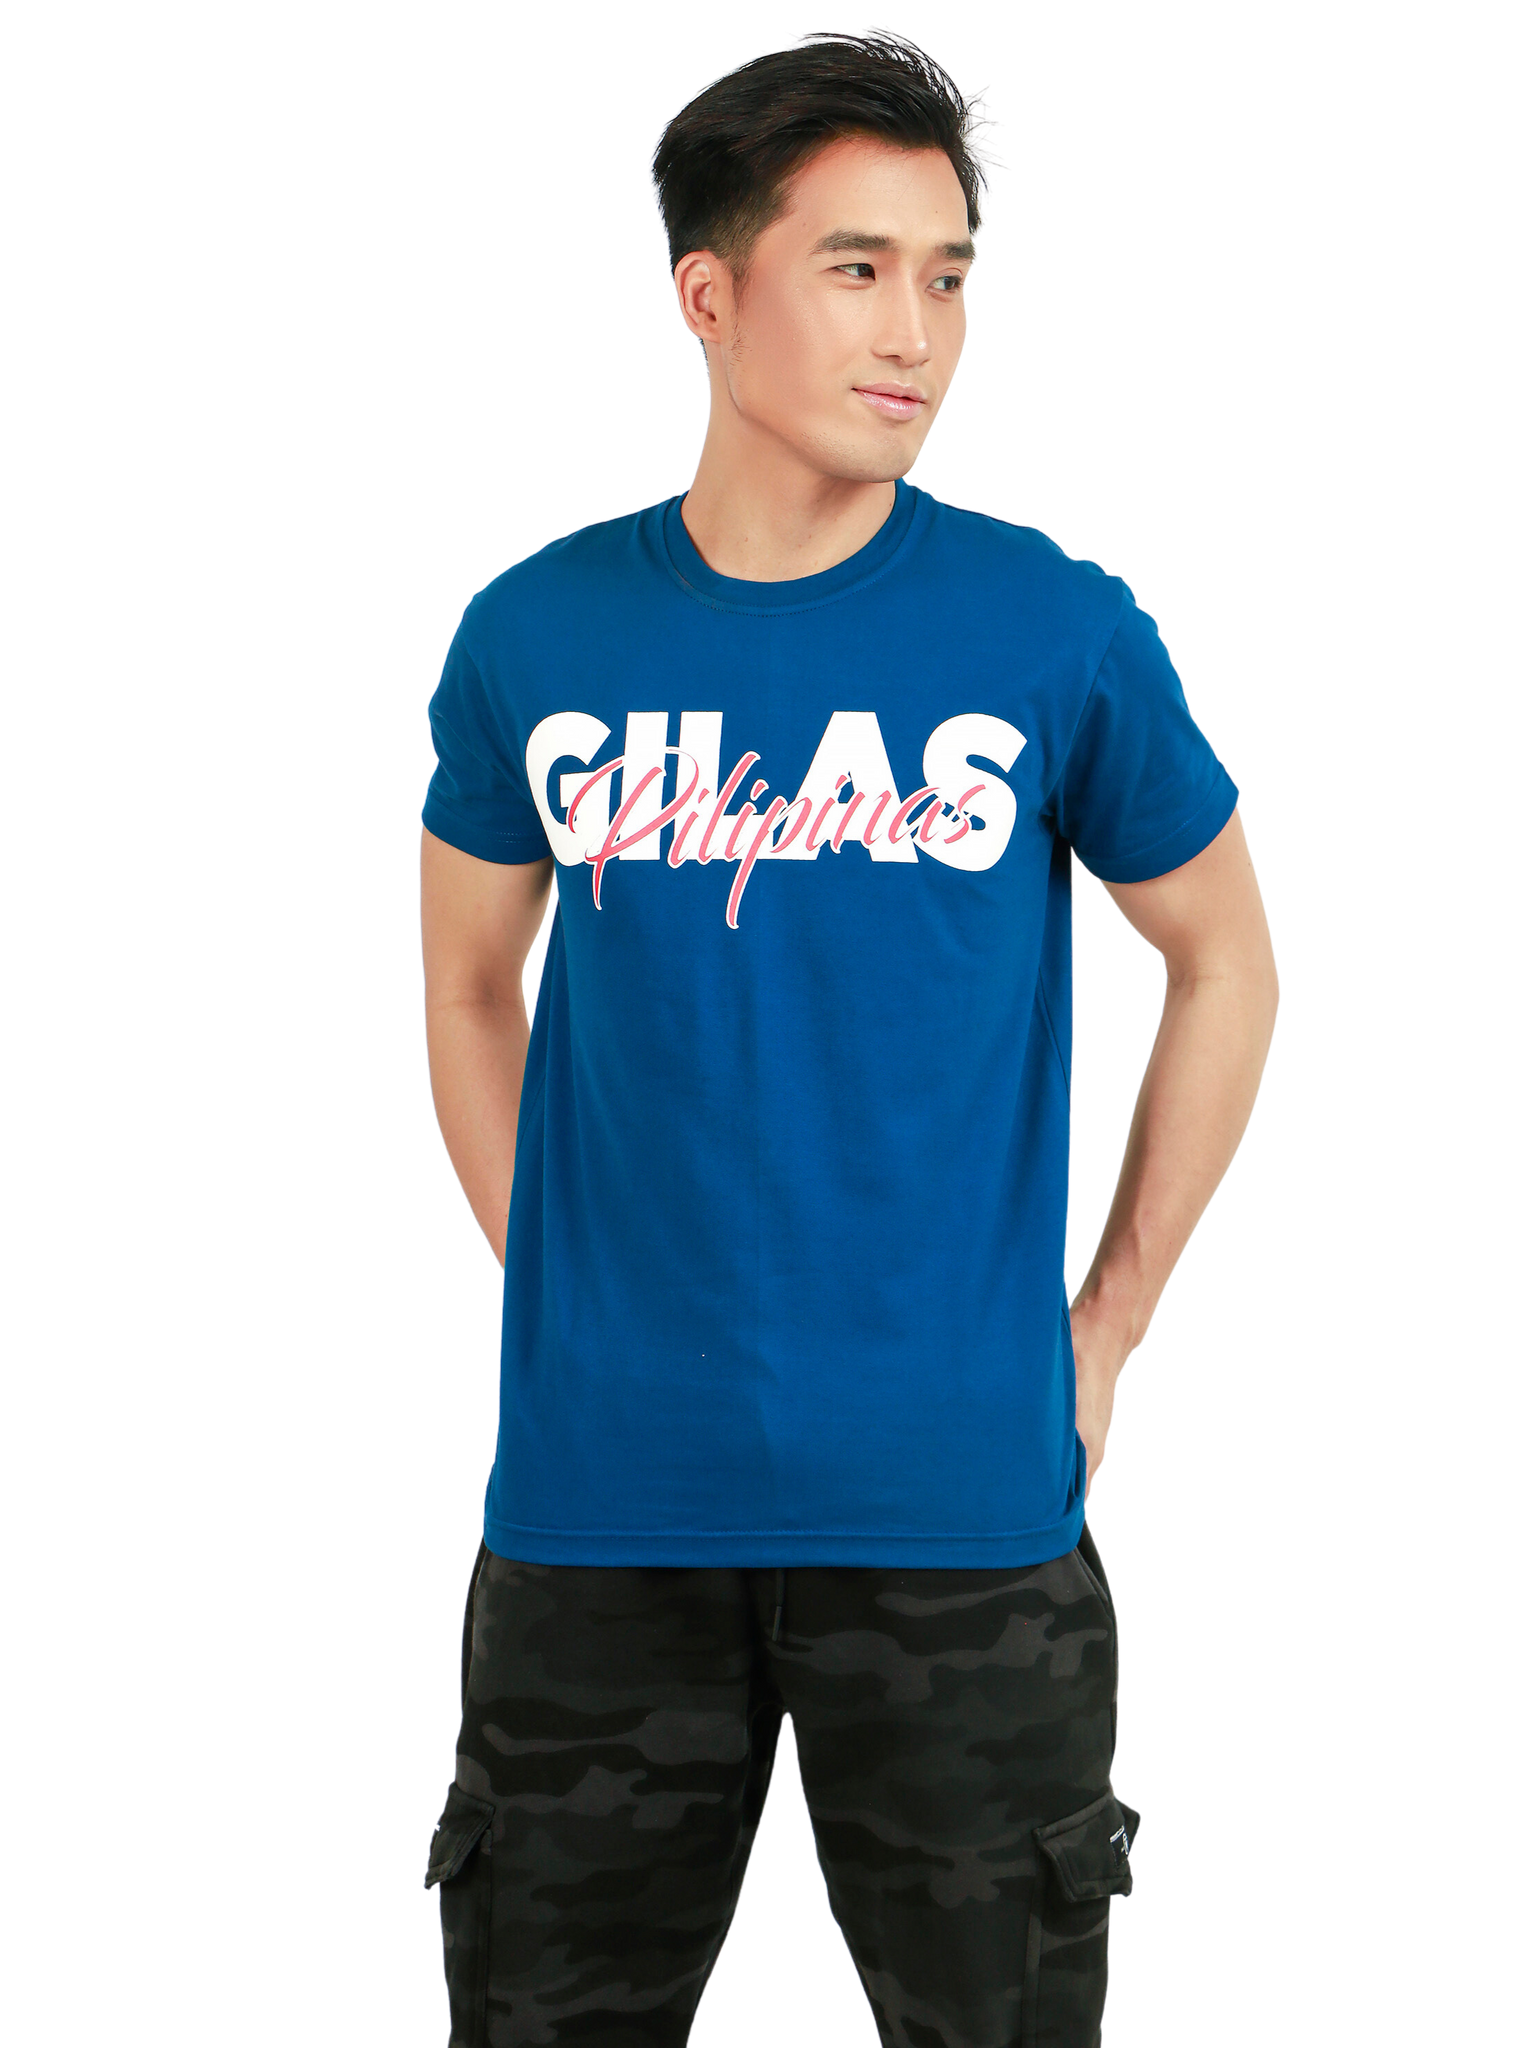 GILAS PILIPINAS in Blue for Mens